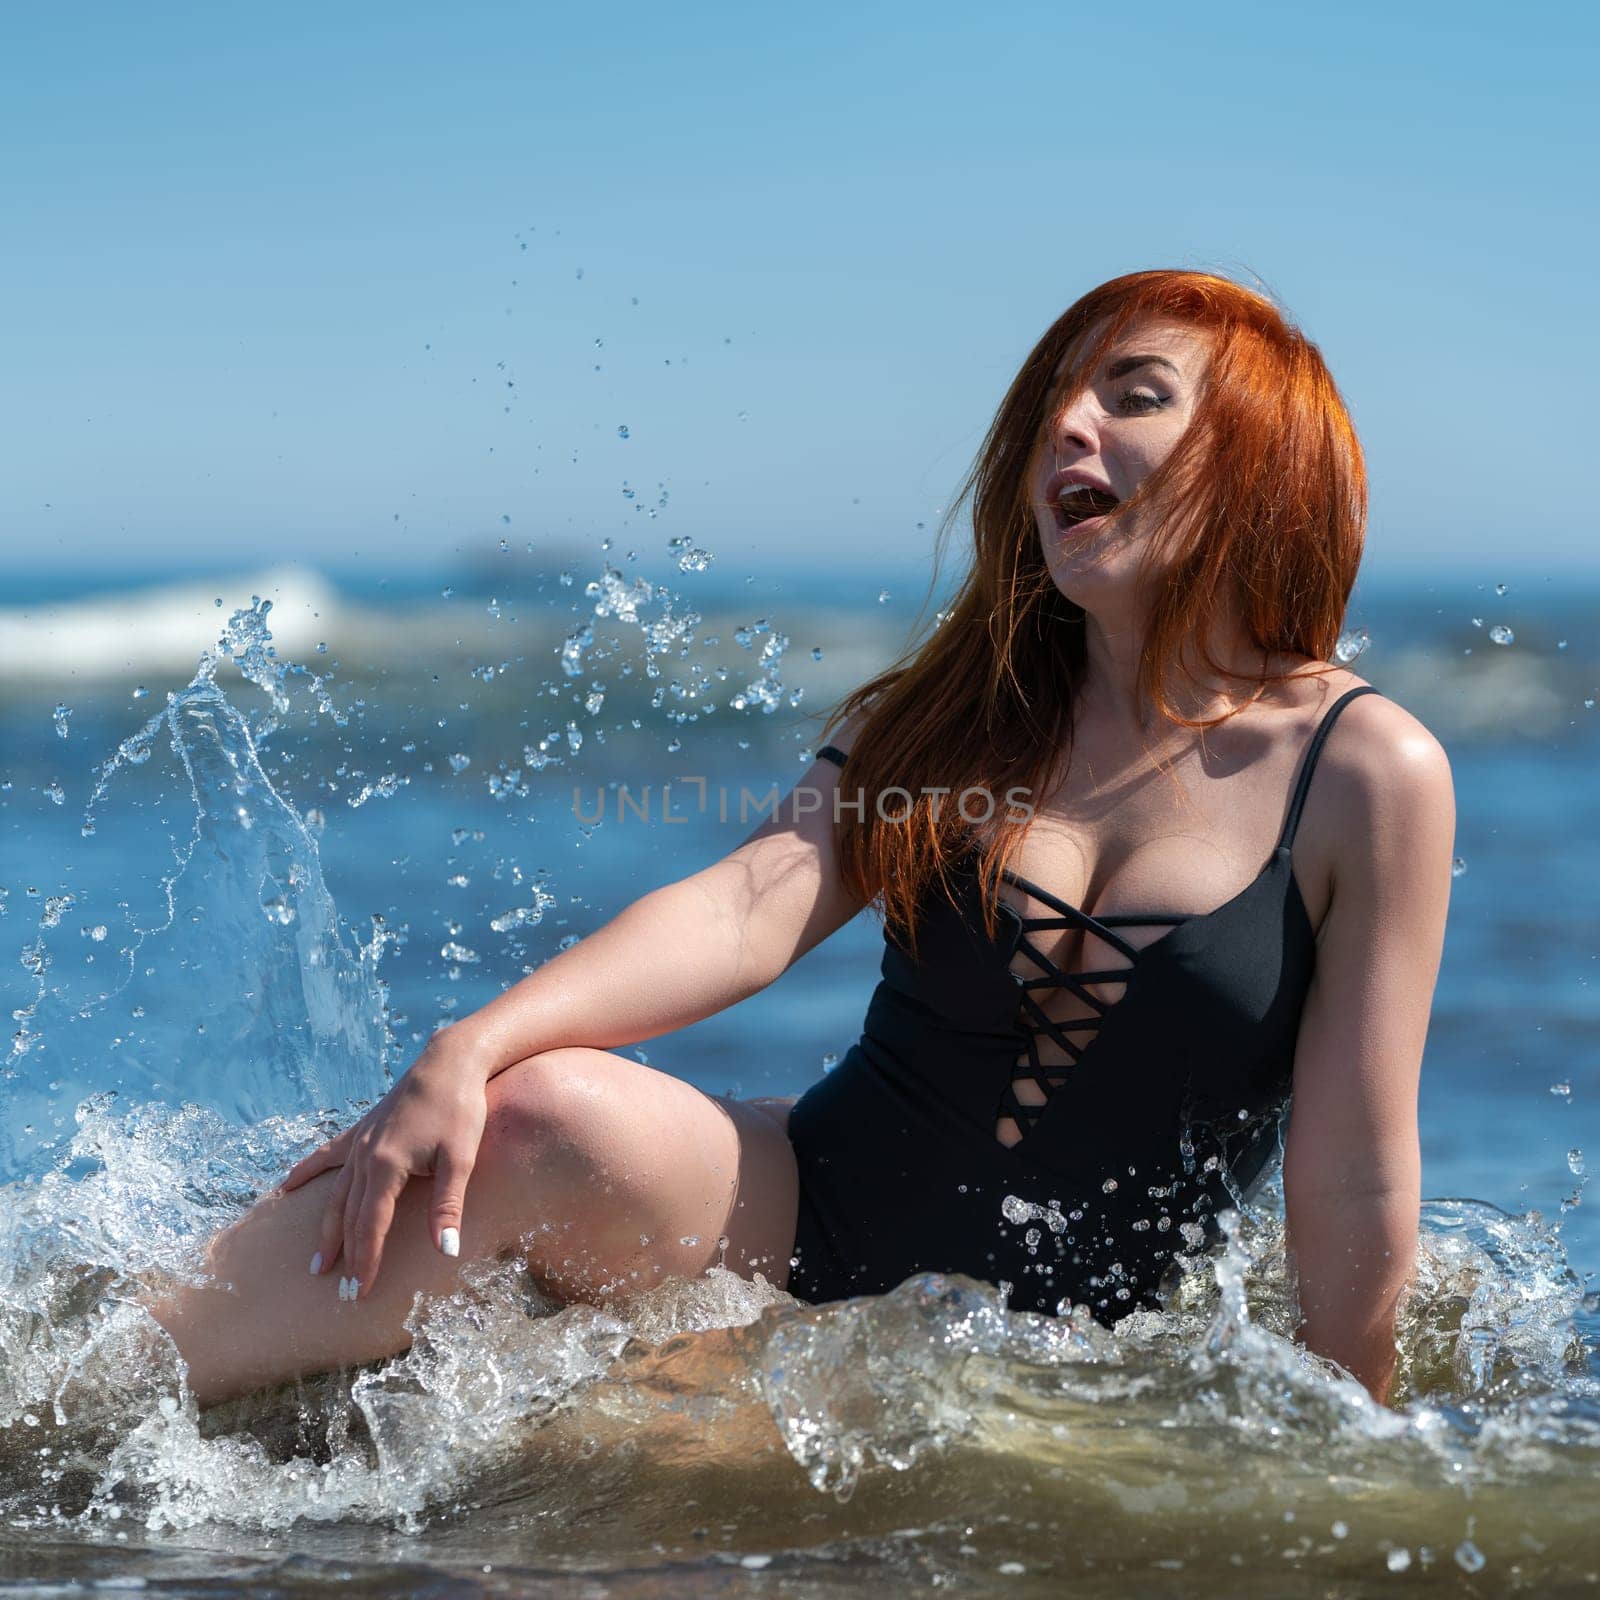 Playful redhead in swimsuit breaks waves and splashes in water with big smile on her face by Alexander-Piragis